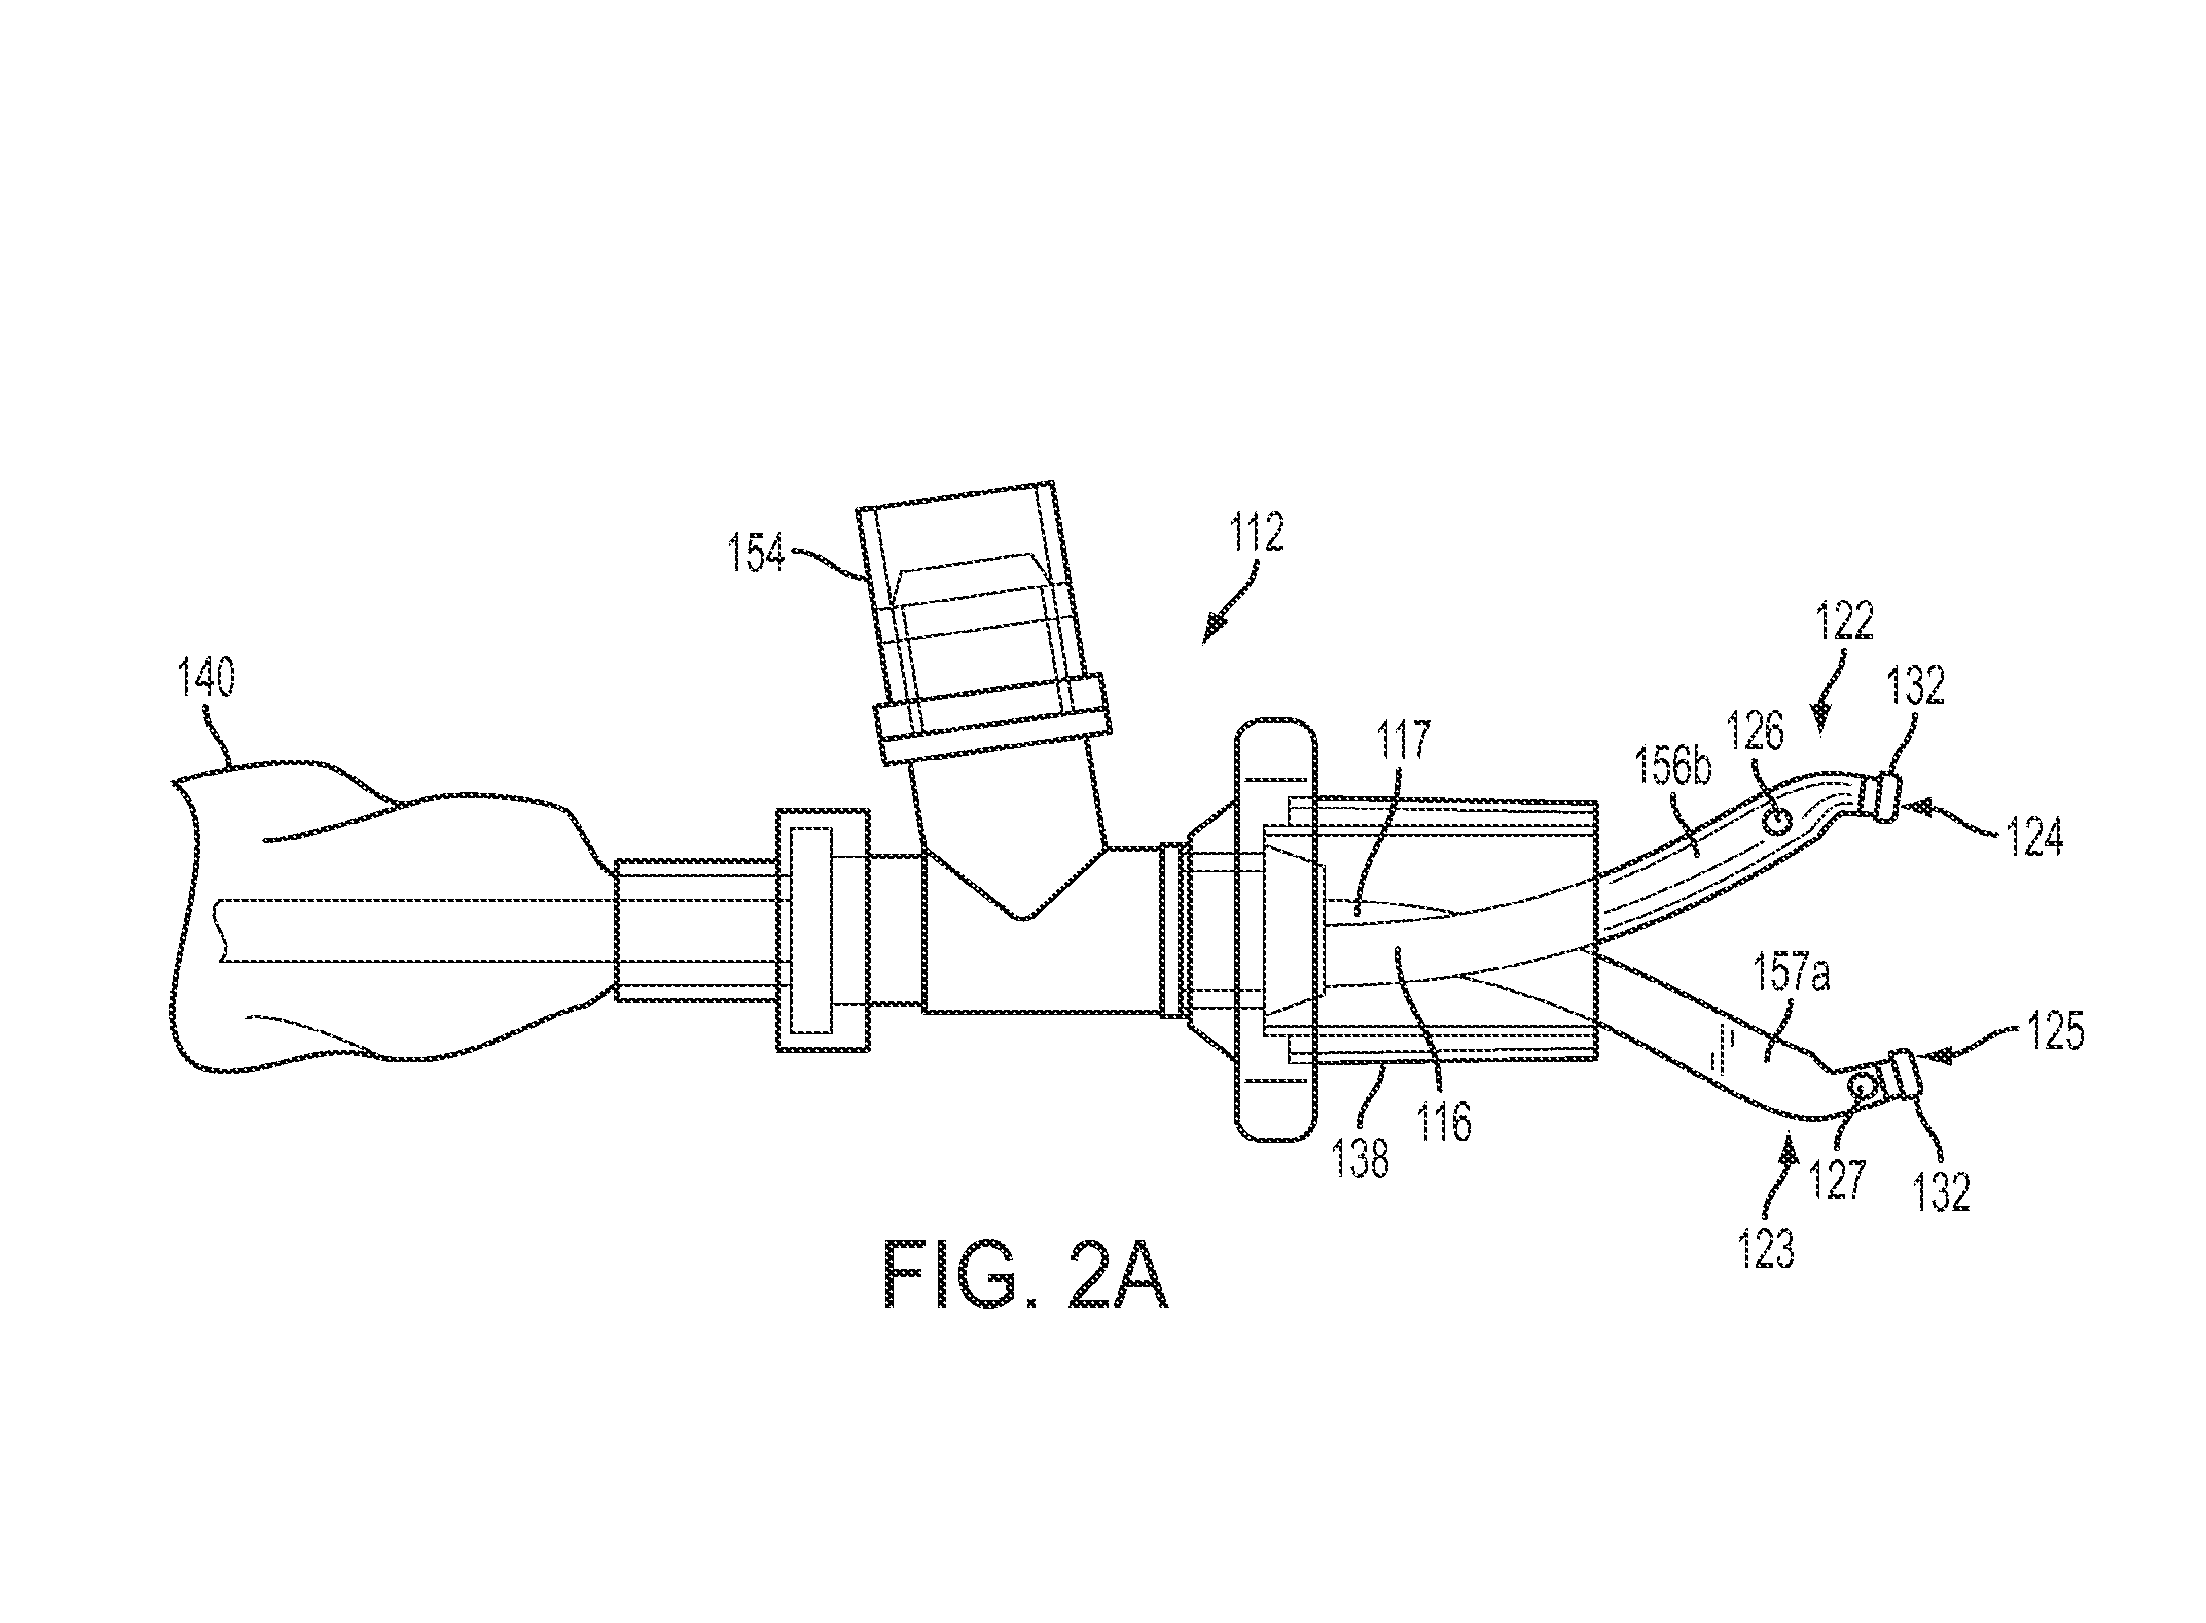 Aspiration catheters, systems, and methods